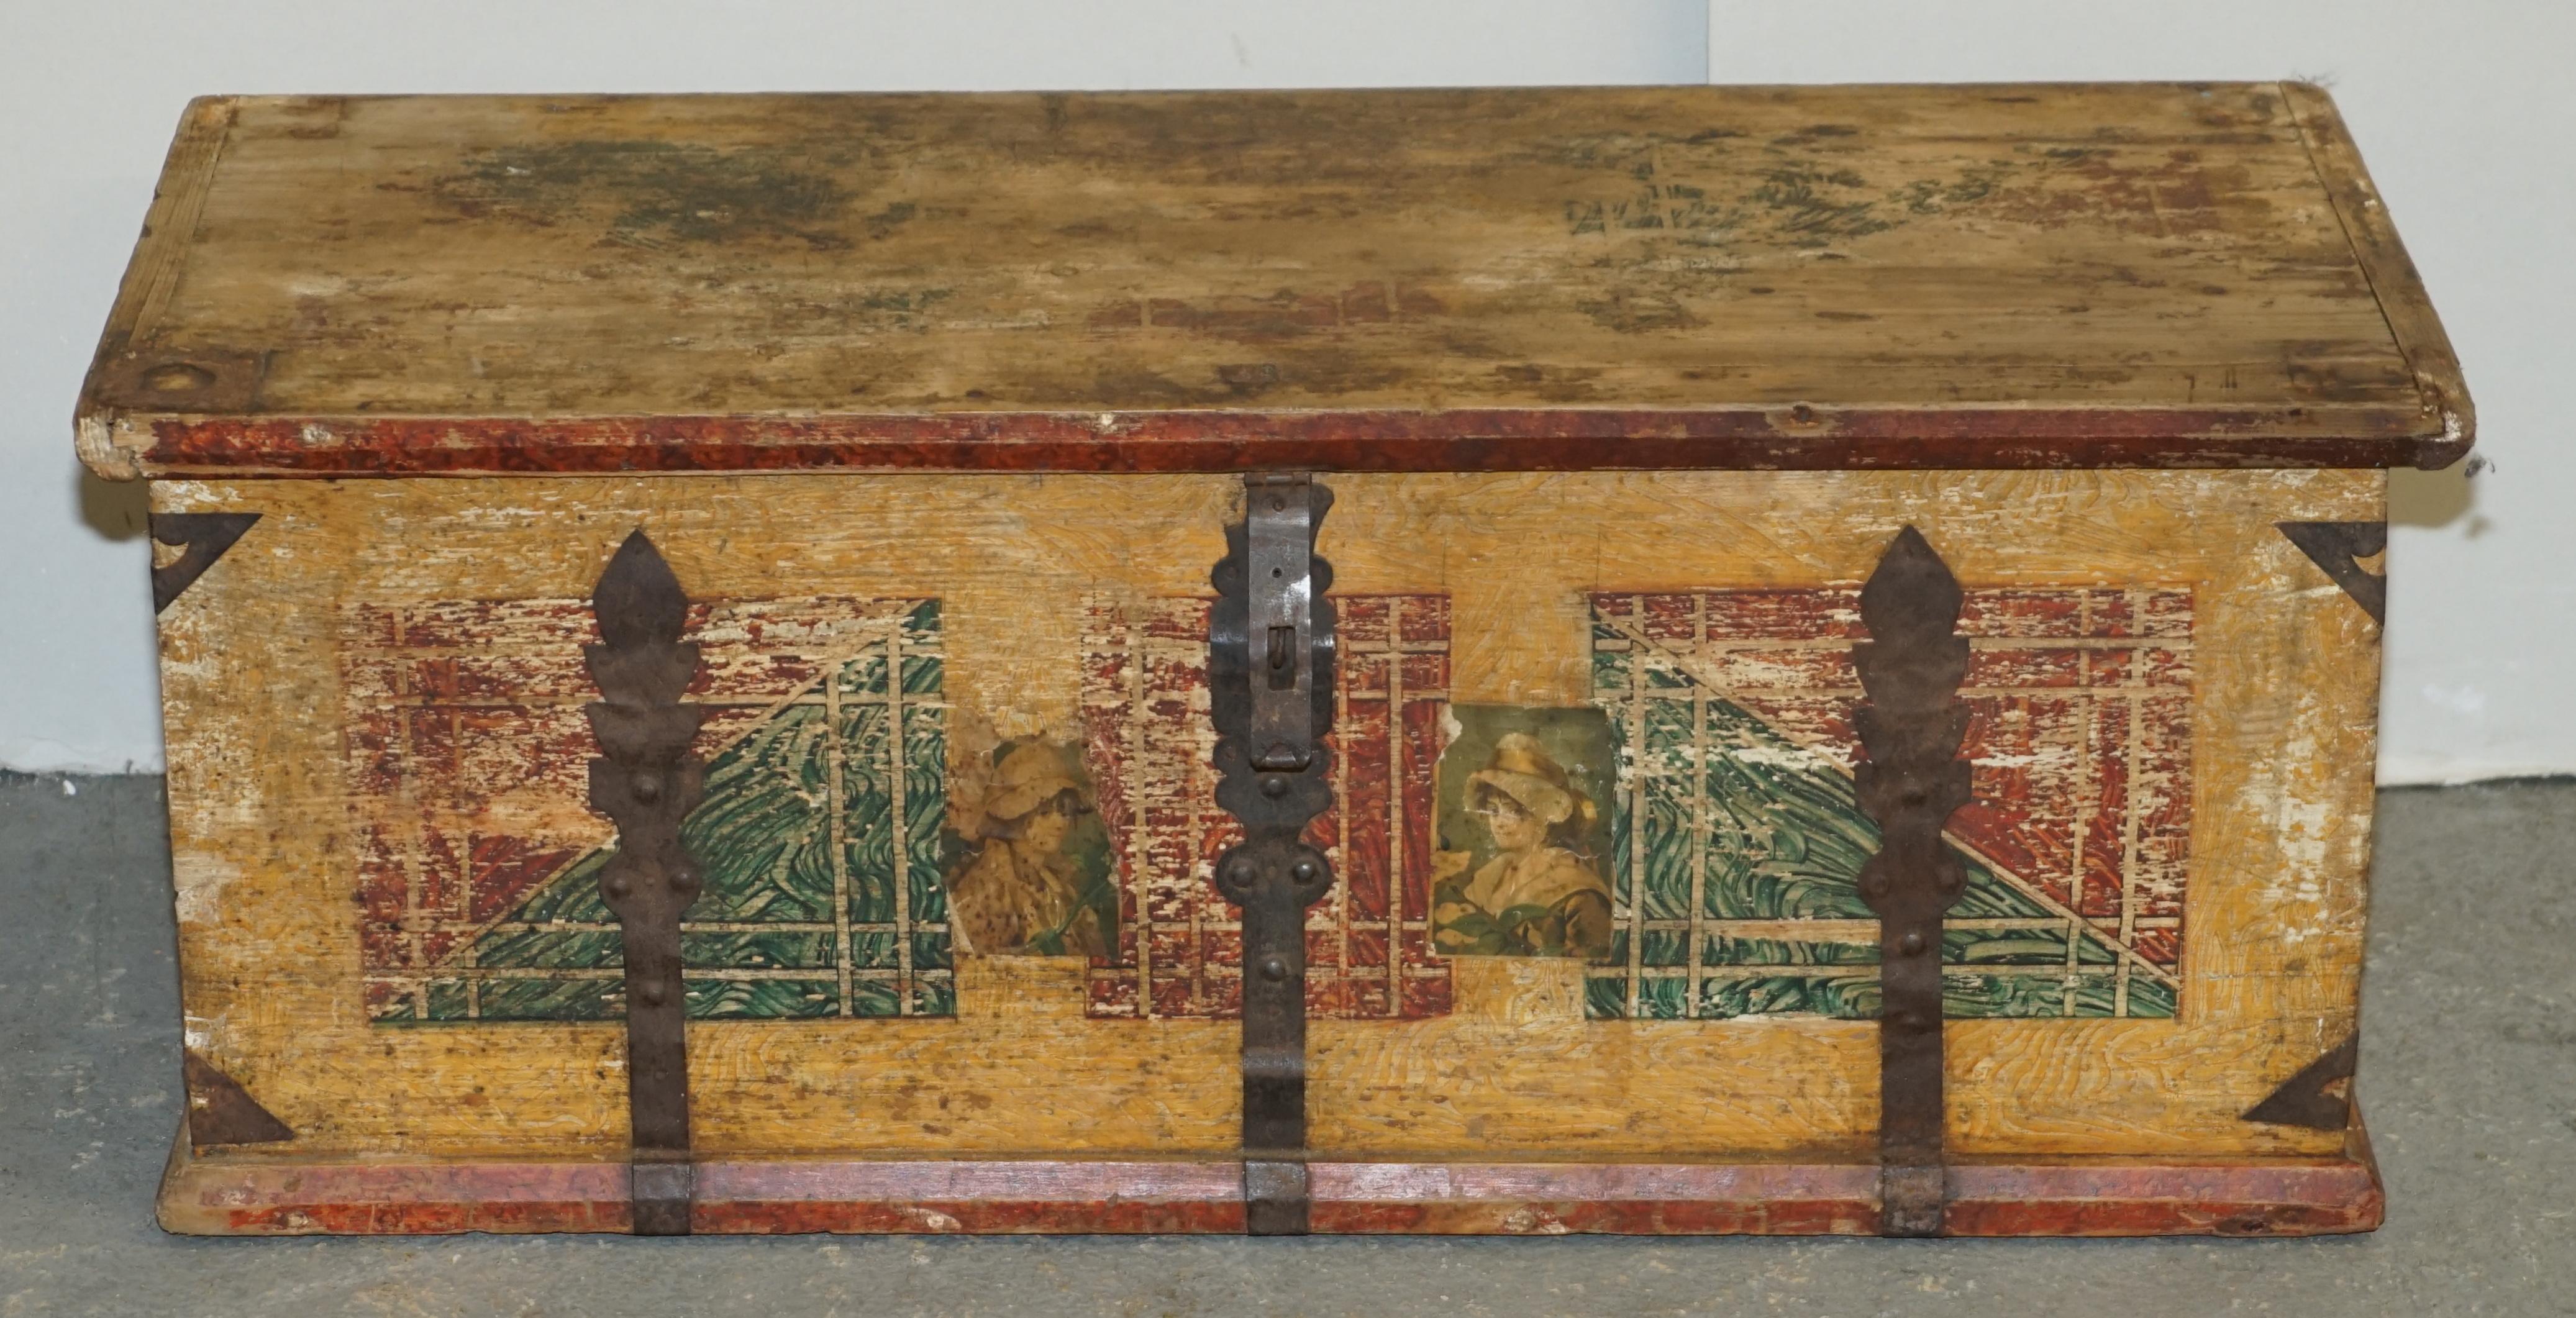 We are delighted to offer for sale this stunning, circa 1900 hand painted Romanian clothes trunk or marriage coffer chest.

I have recently purchased a very large collection of these original, antique painted wardrobes and trunks, I have around 15